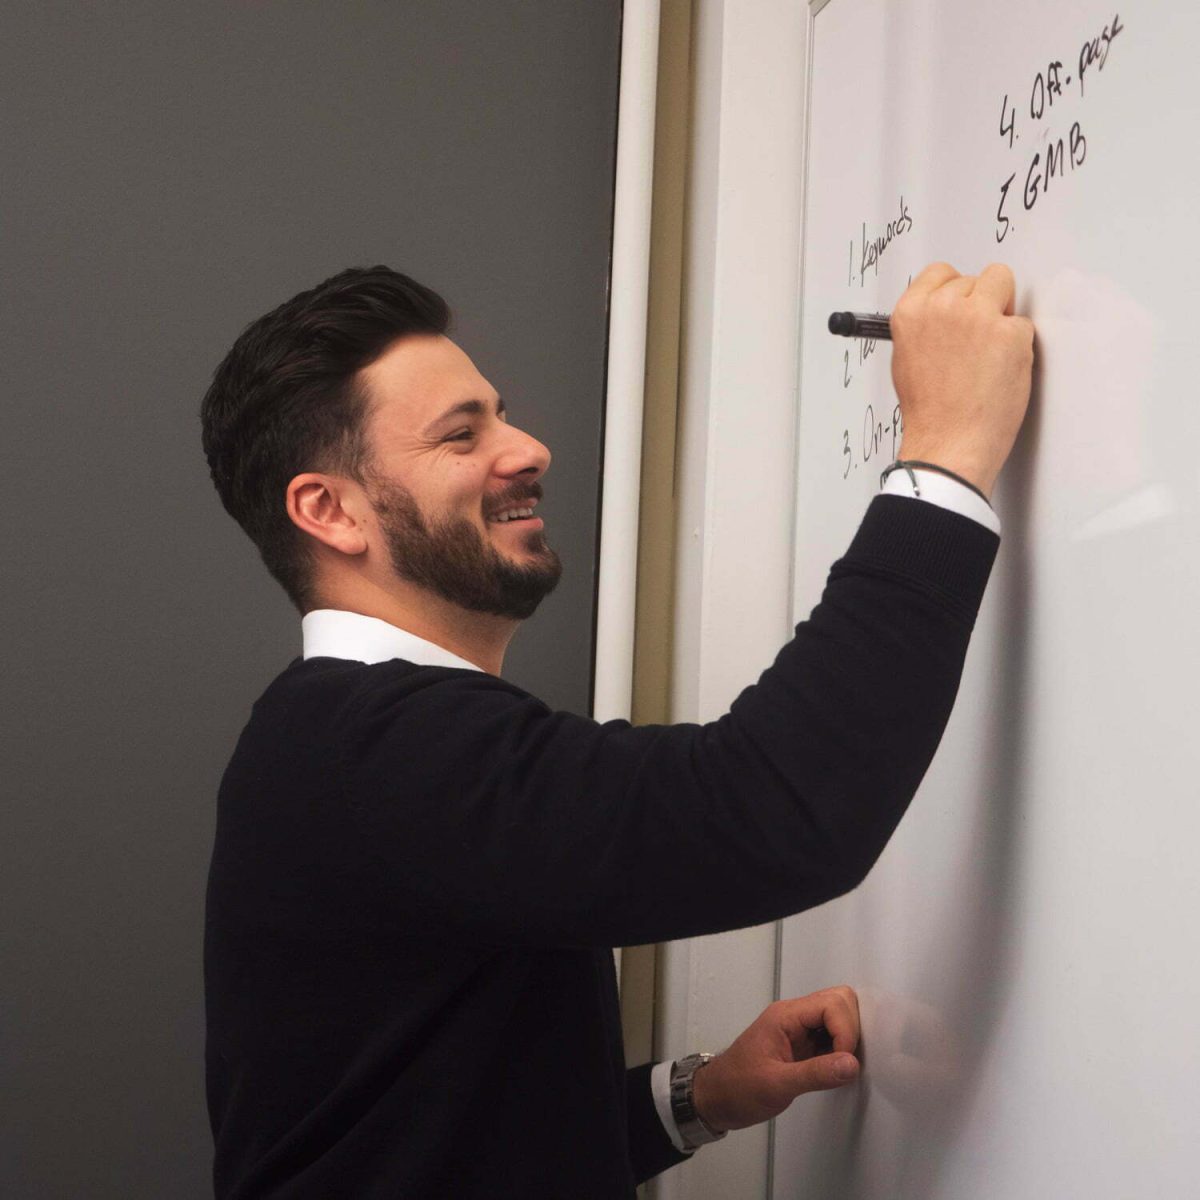 man writing on a white board